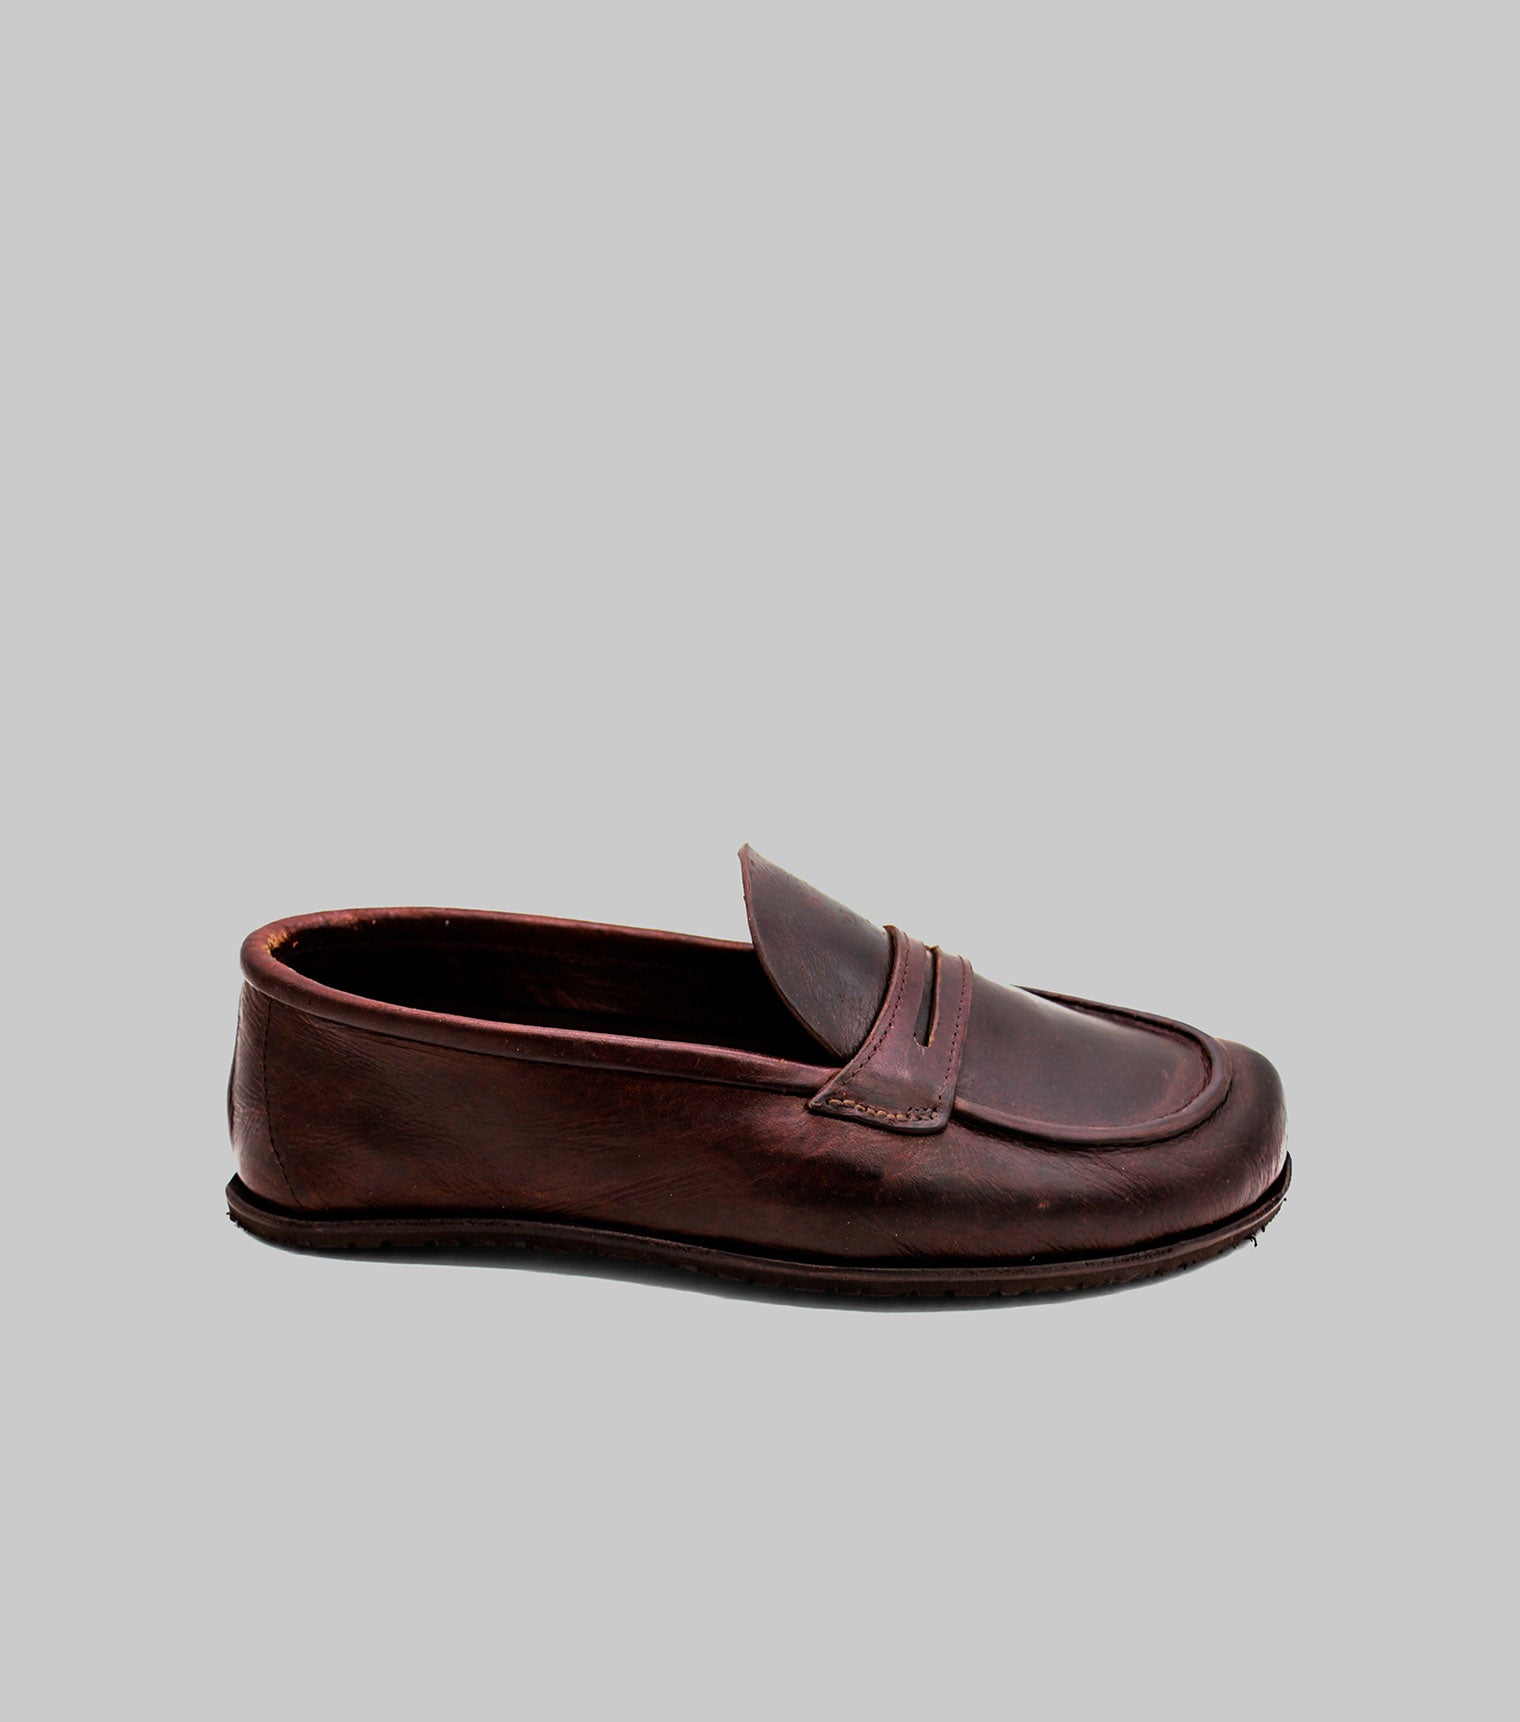 Made to Order Barefoot Loafers in Spanish Veg Tan Leather